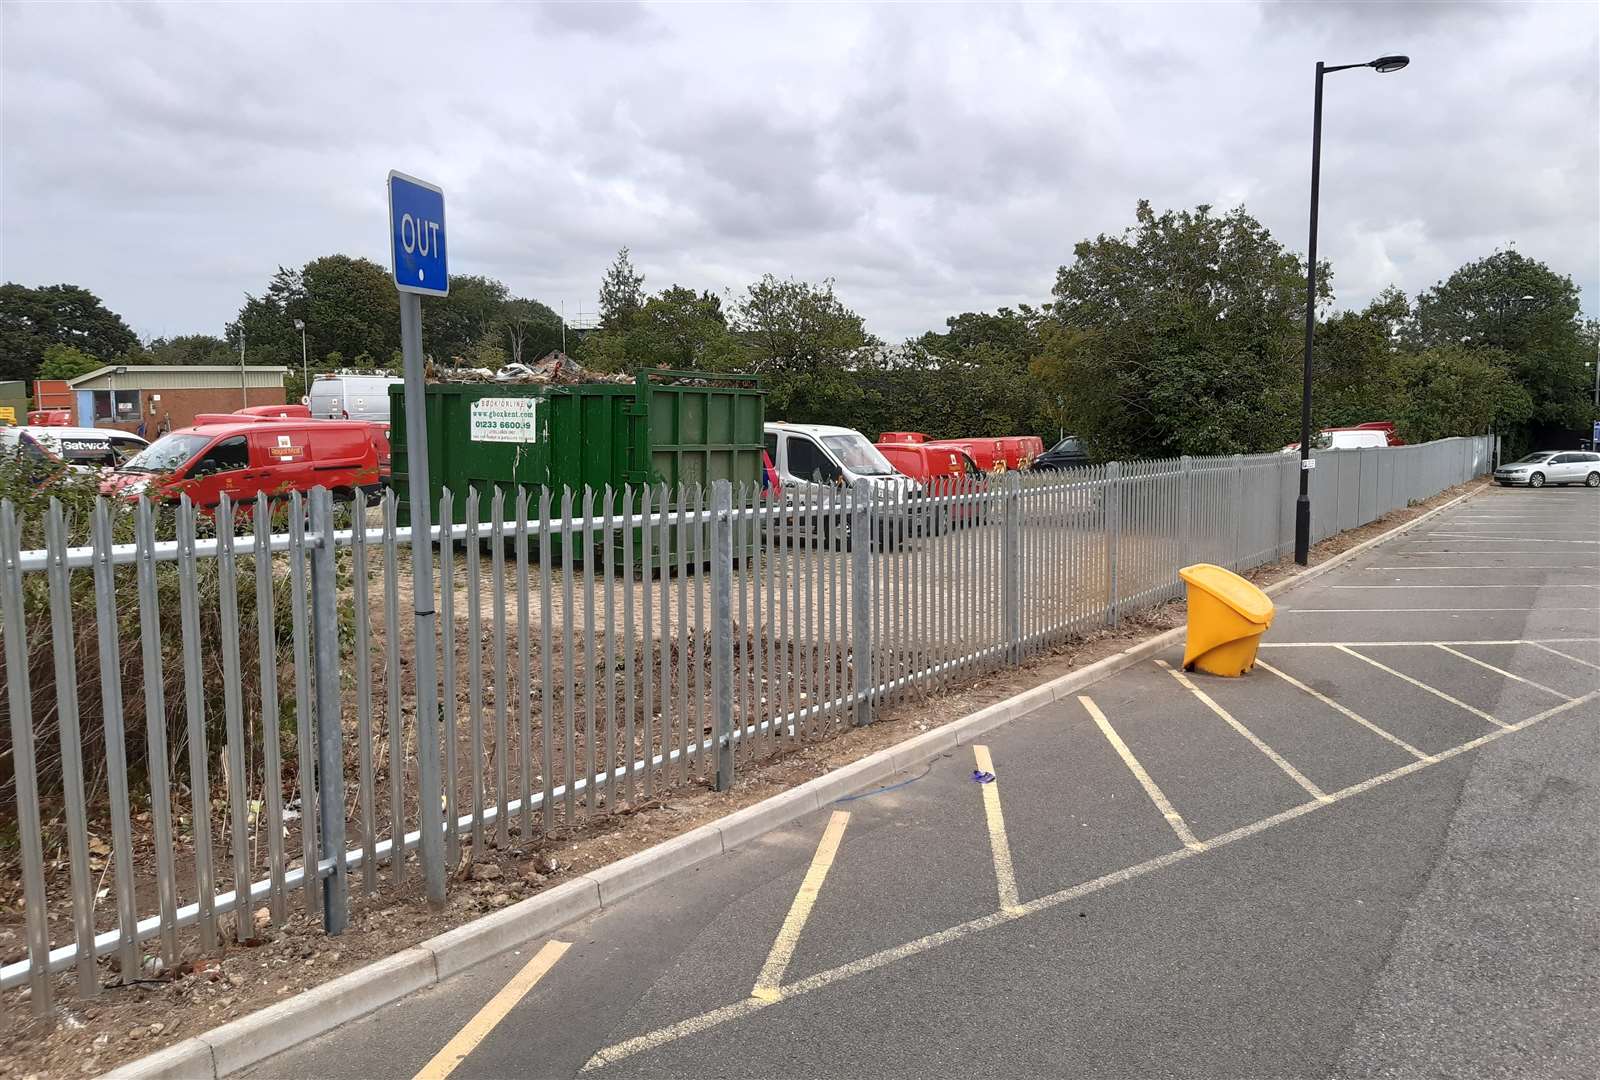 A new security fence has been erected around the site in recent weeks